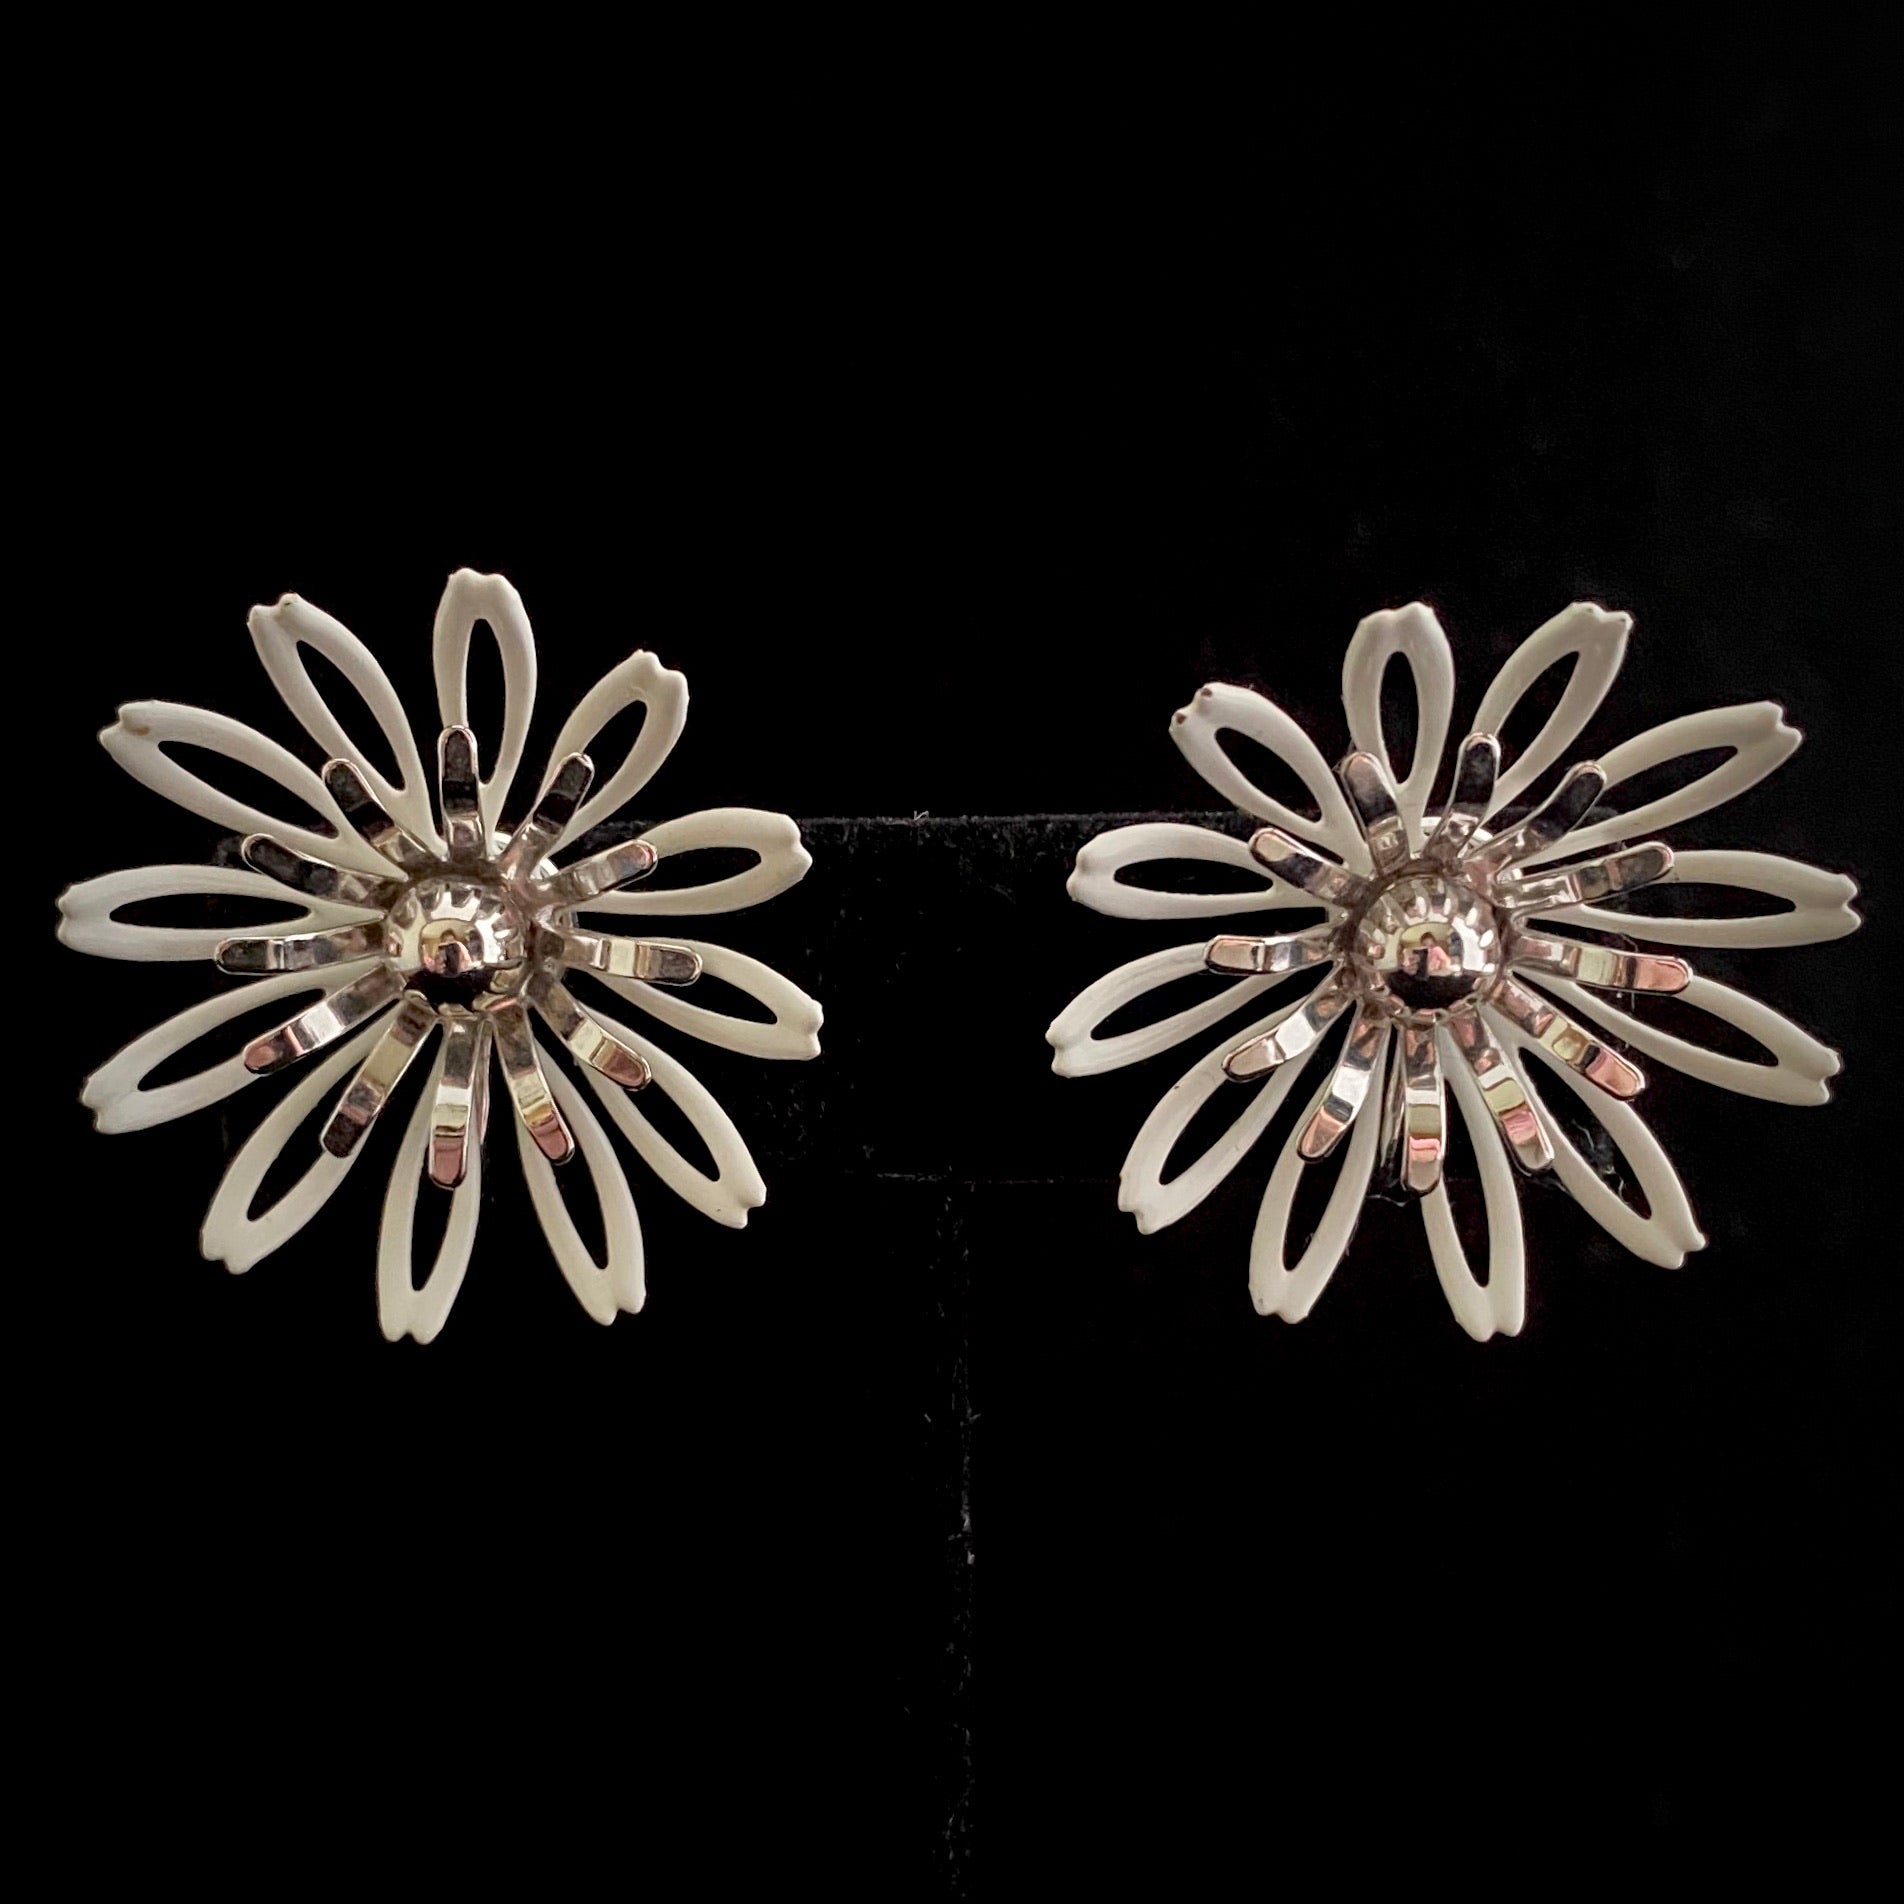 1972 Sarah Conventry White Petals Brooch & Earrings - Retro Kandy Vintage